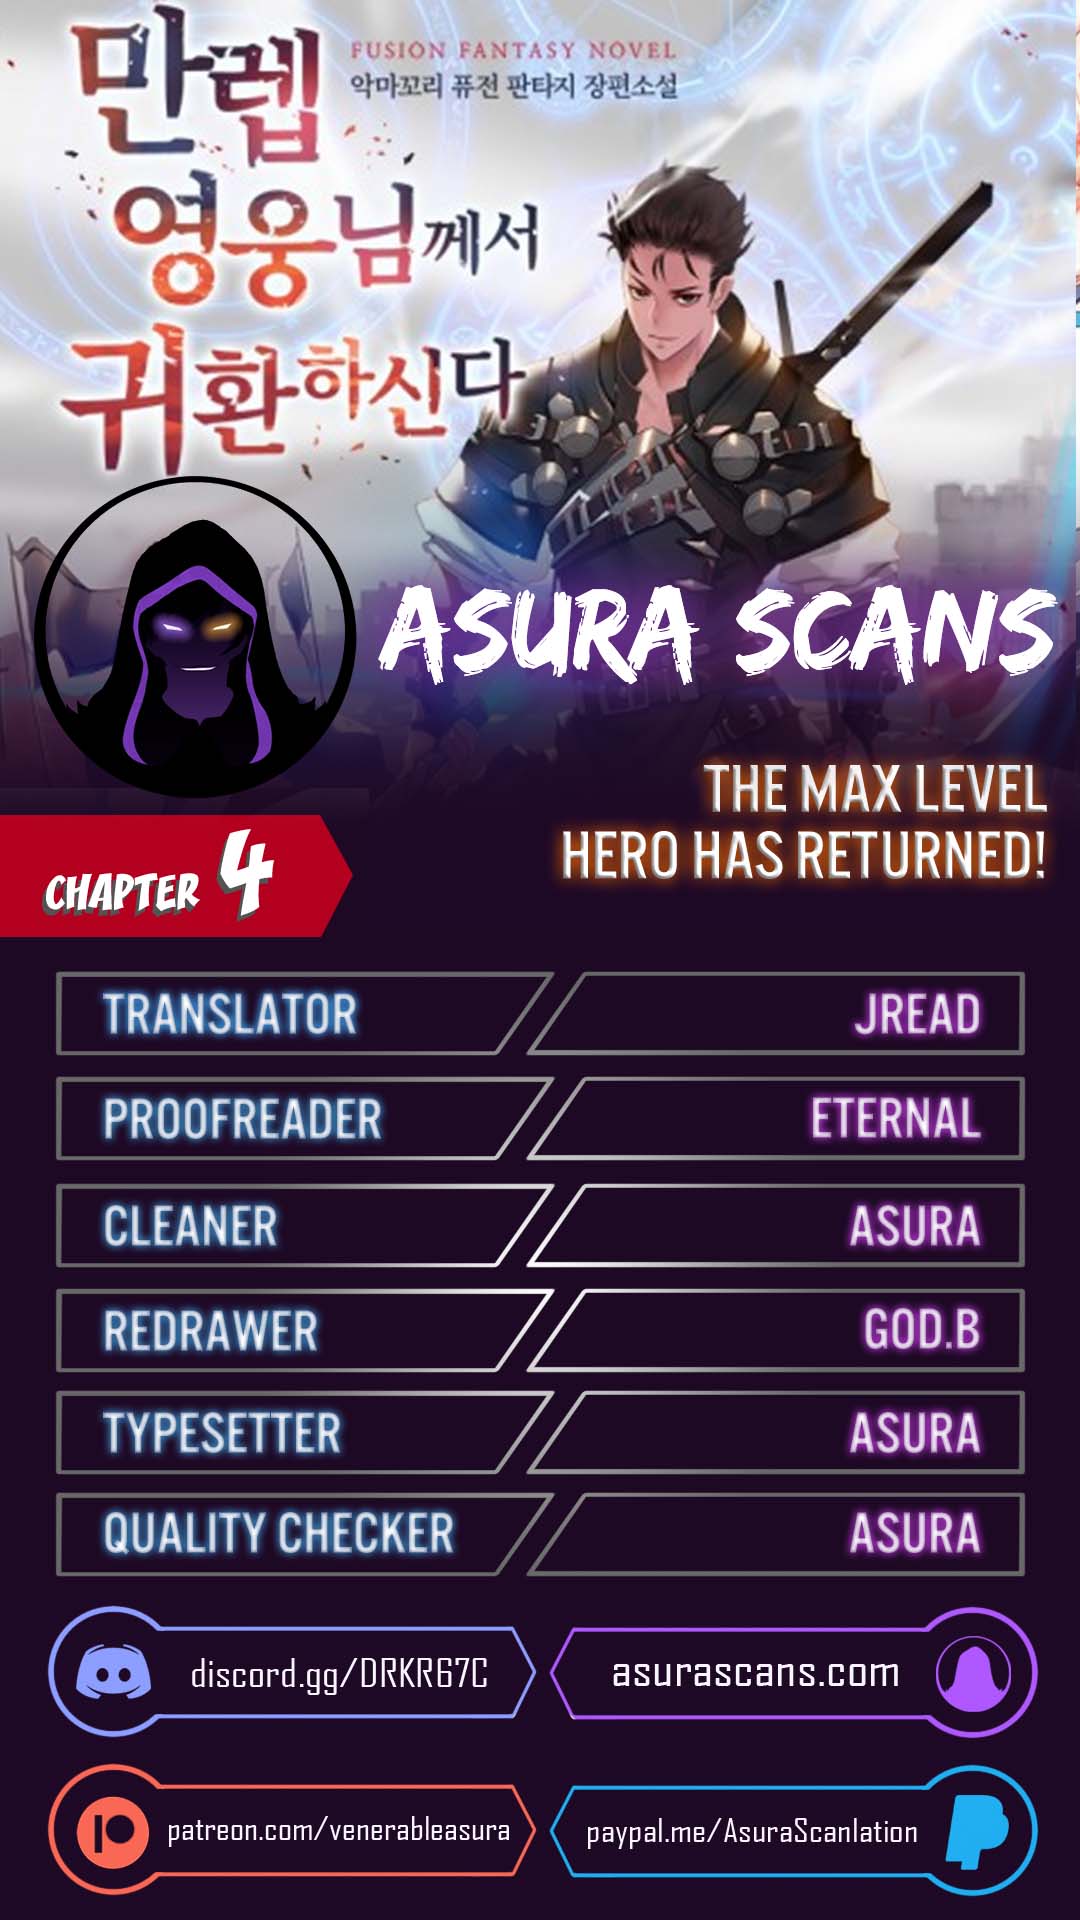 The Max Level Hero Has Returned! Ch. 4